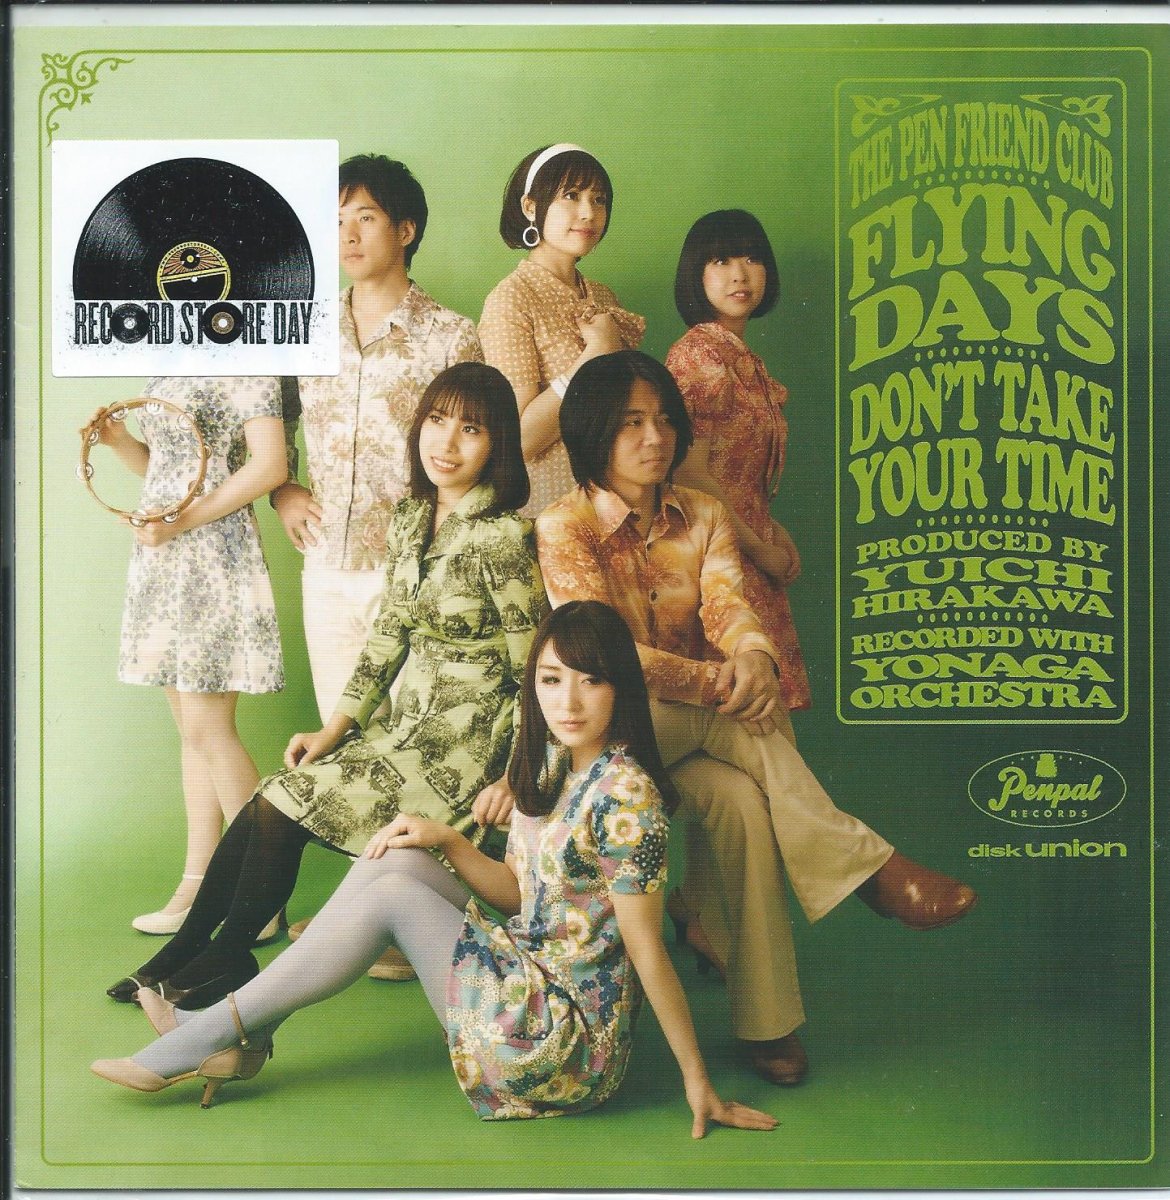 THE PEN FRIEND CLUB / 飛翔する日常 FLYING DAYS / DON'T TAKE YOUR TIME (7